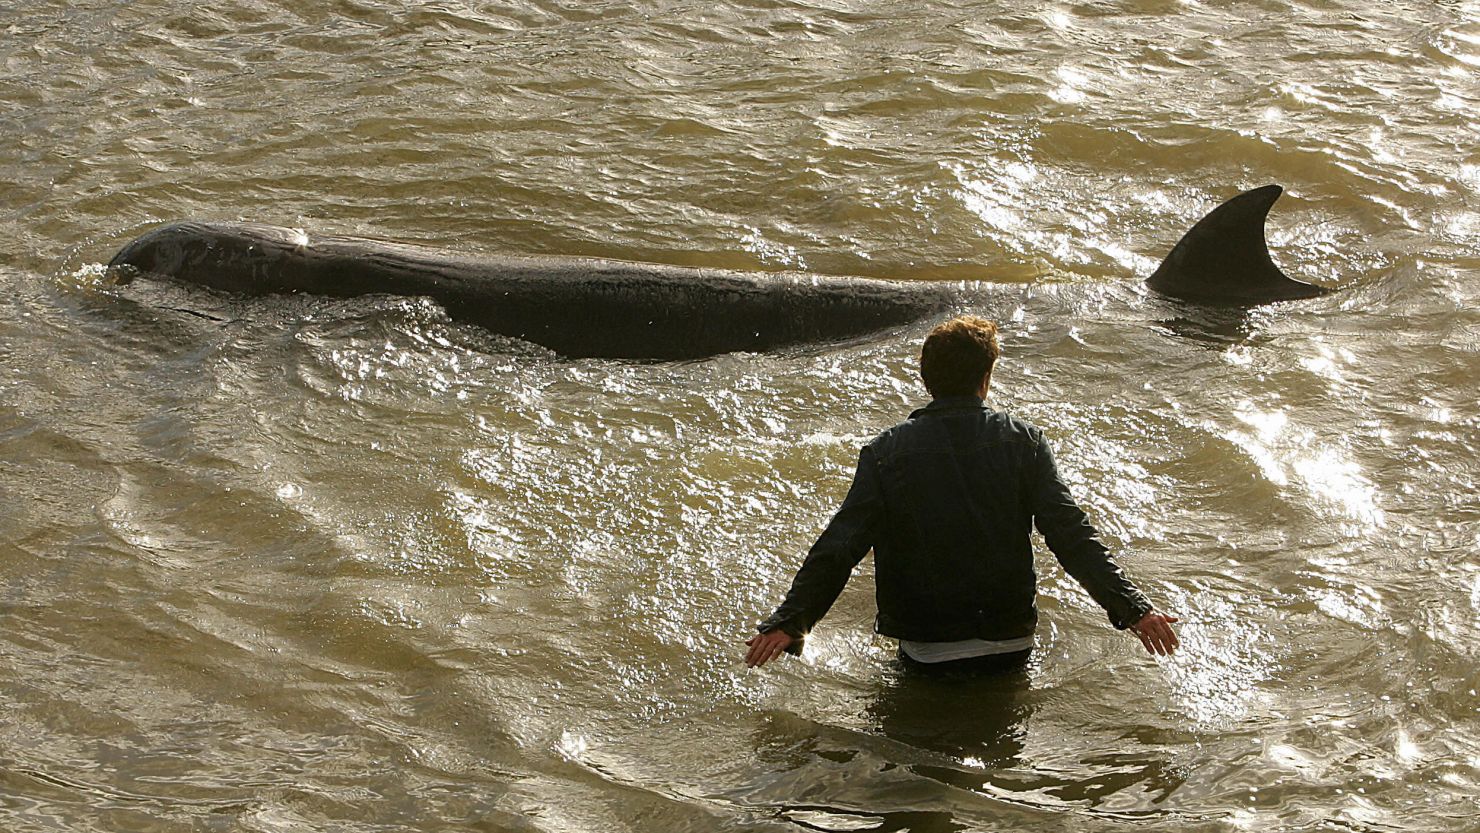 A northern bottle-nose whale swims along the banks of the River Thames in London in 2006.